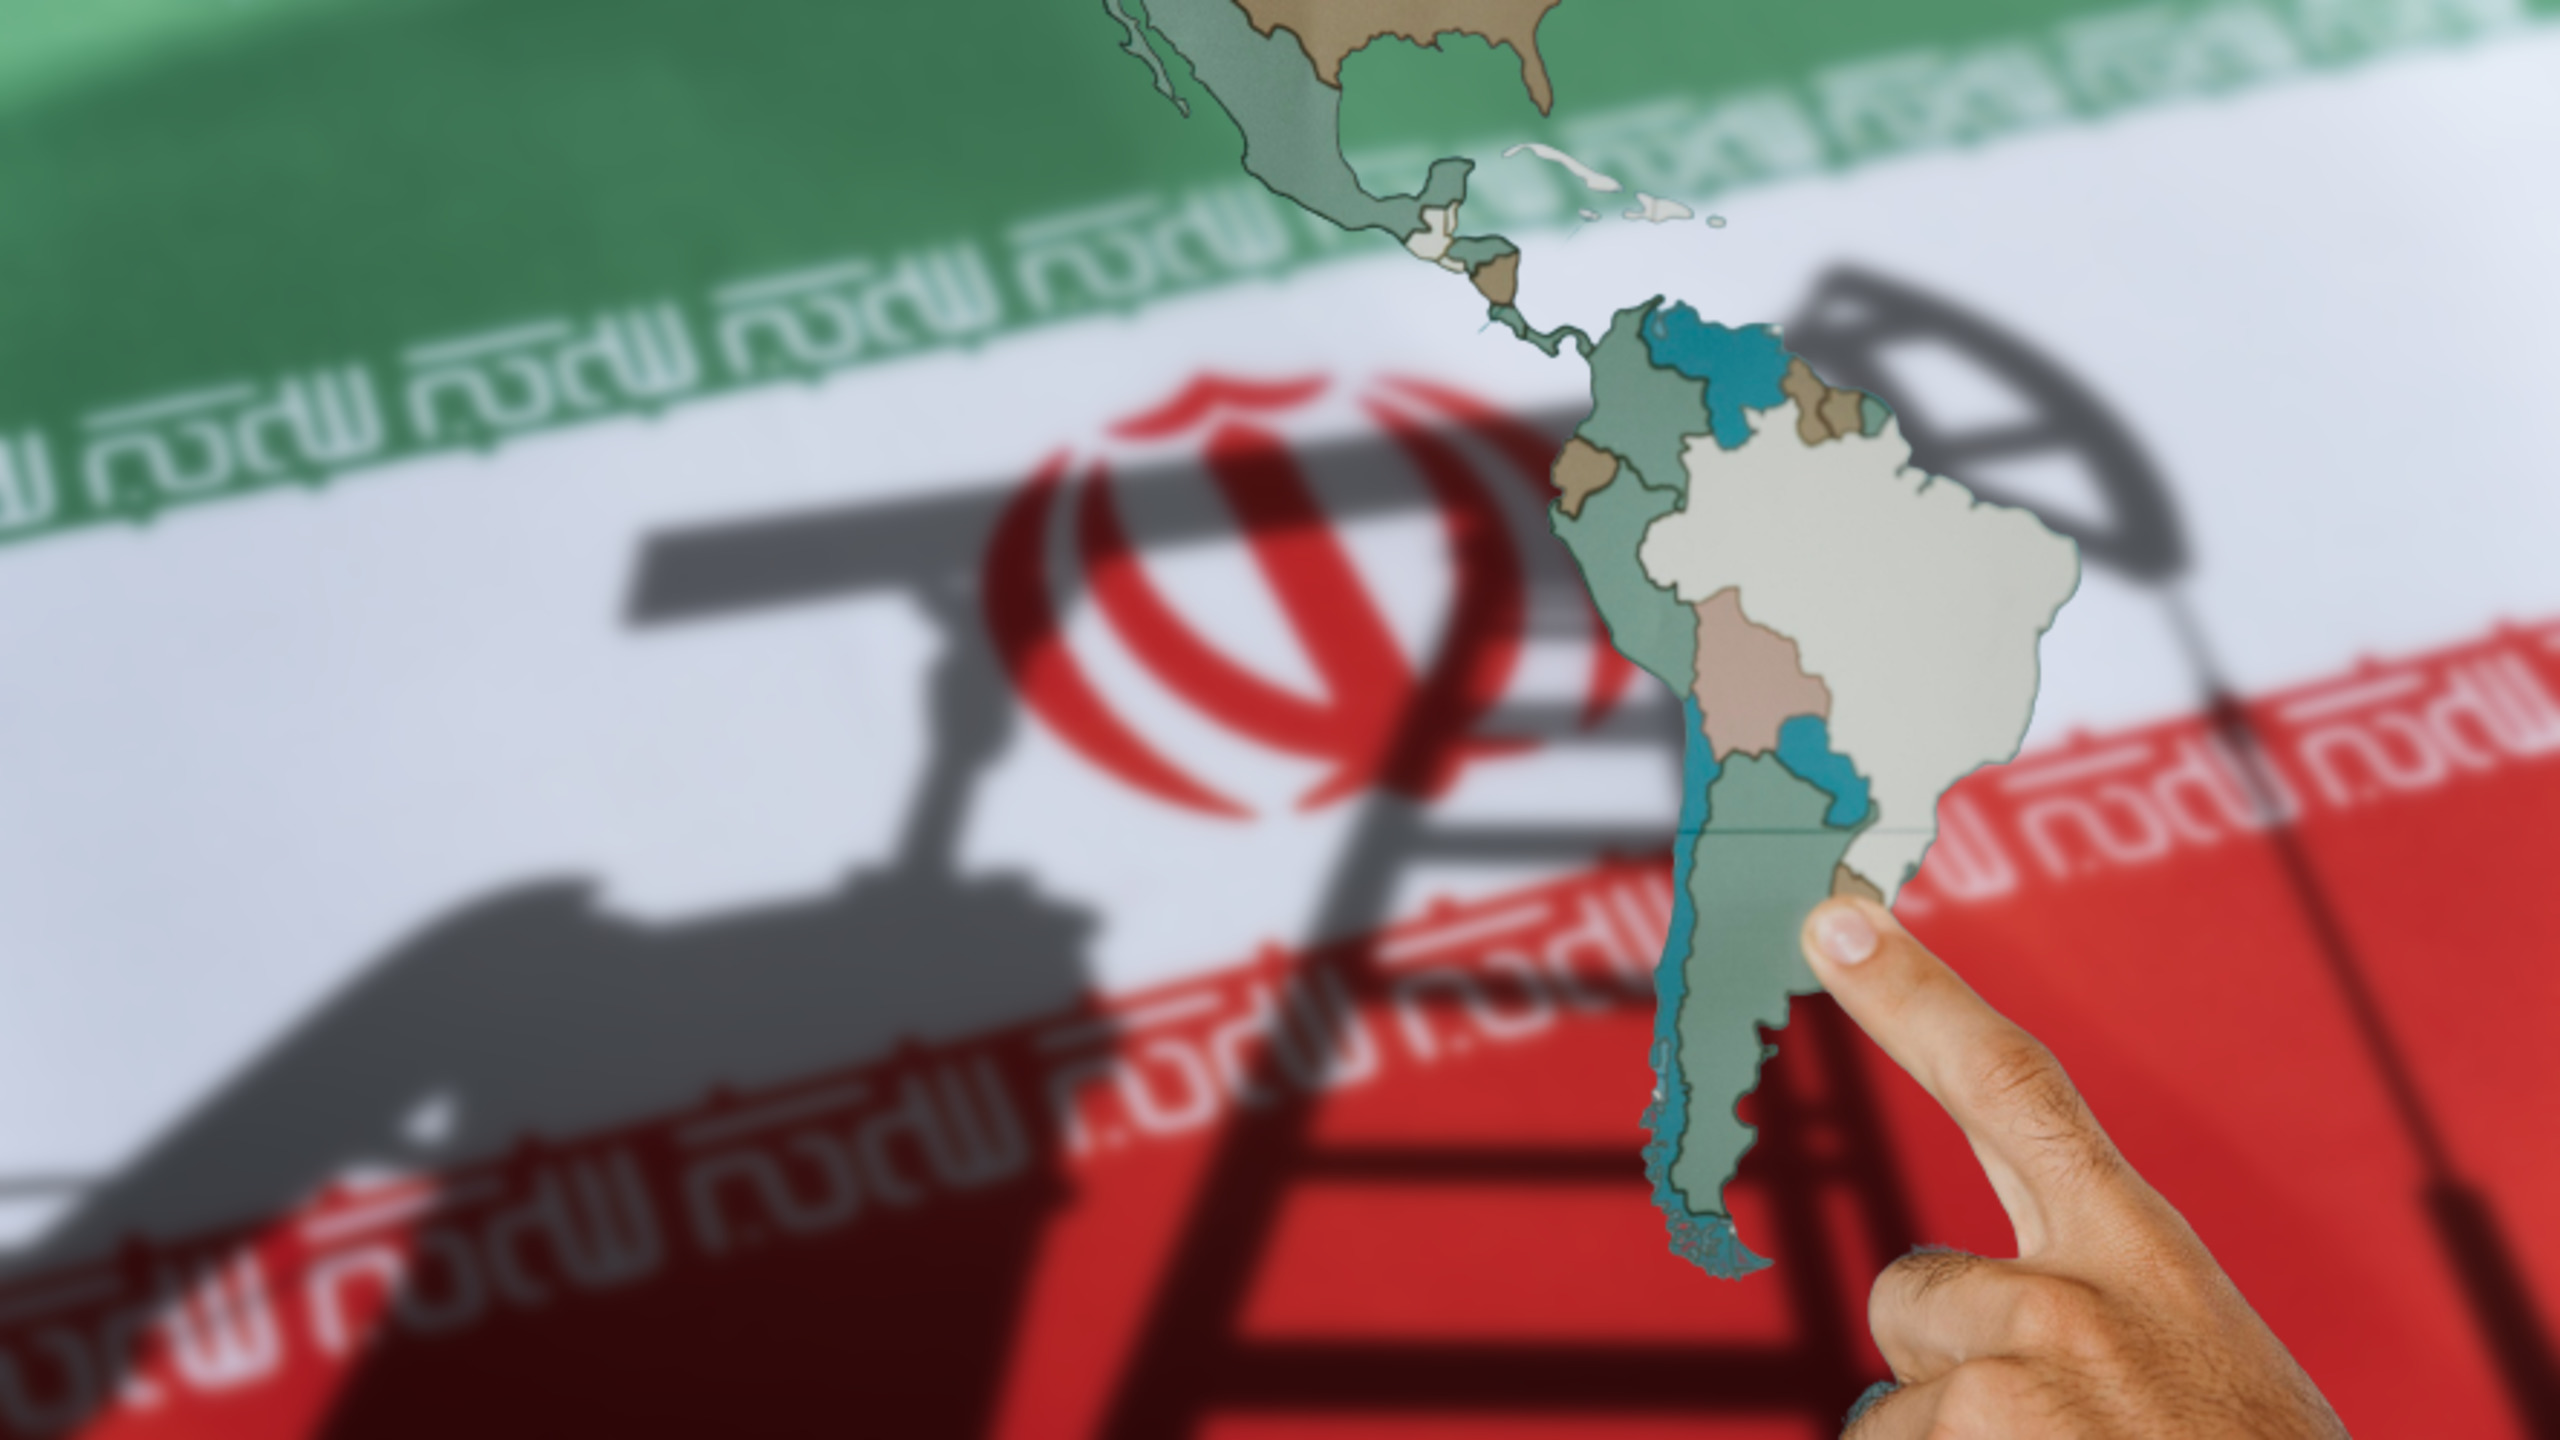 A Renewed Iran Nuclear Deal Would Have Mixed Effects on Latin America, Experts Say